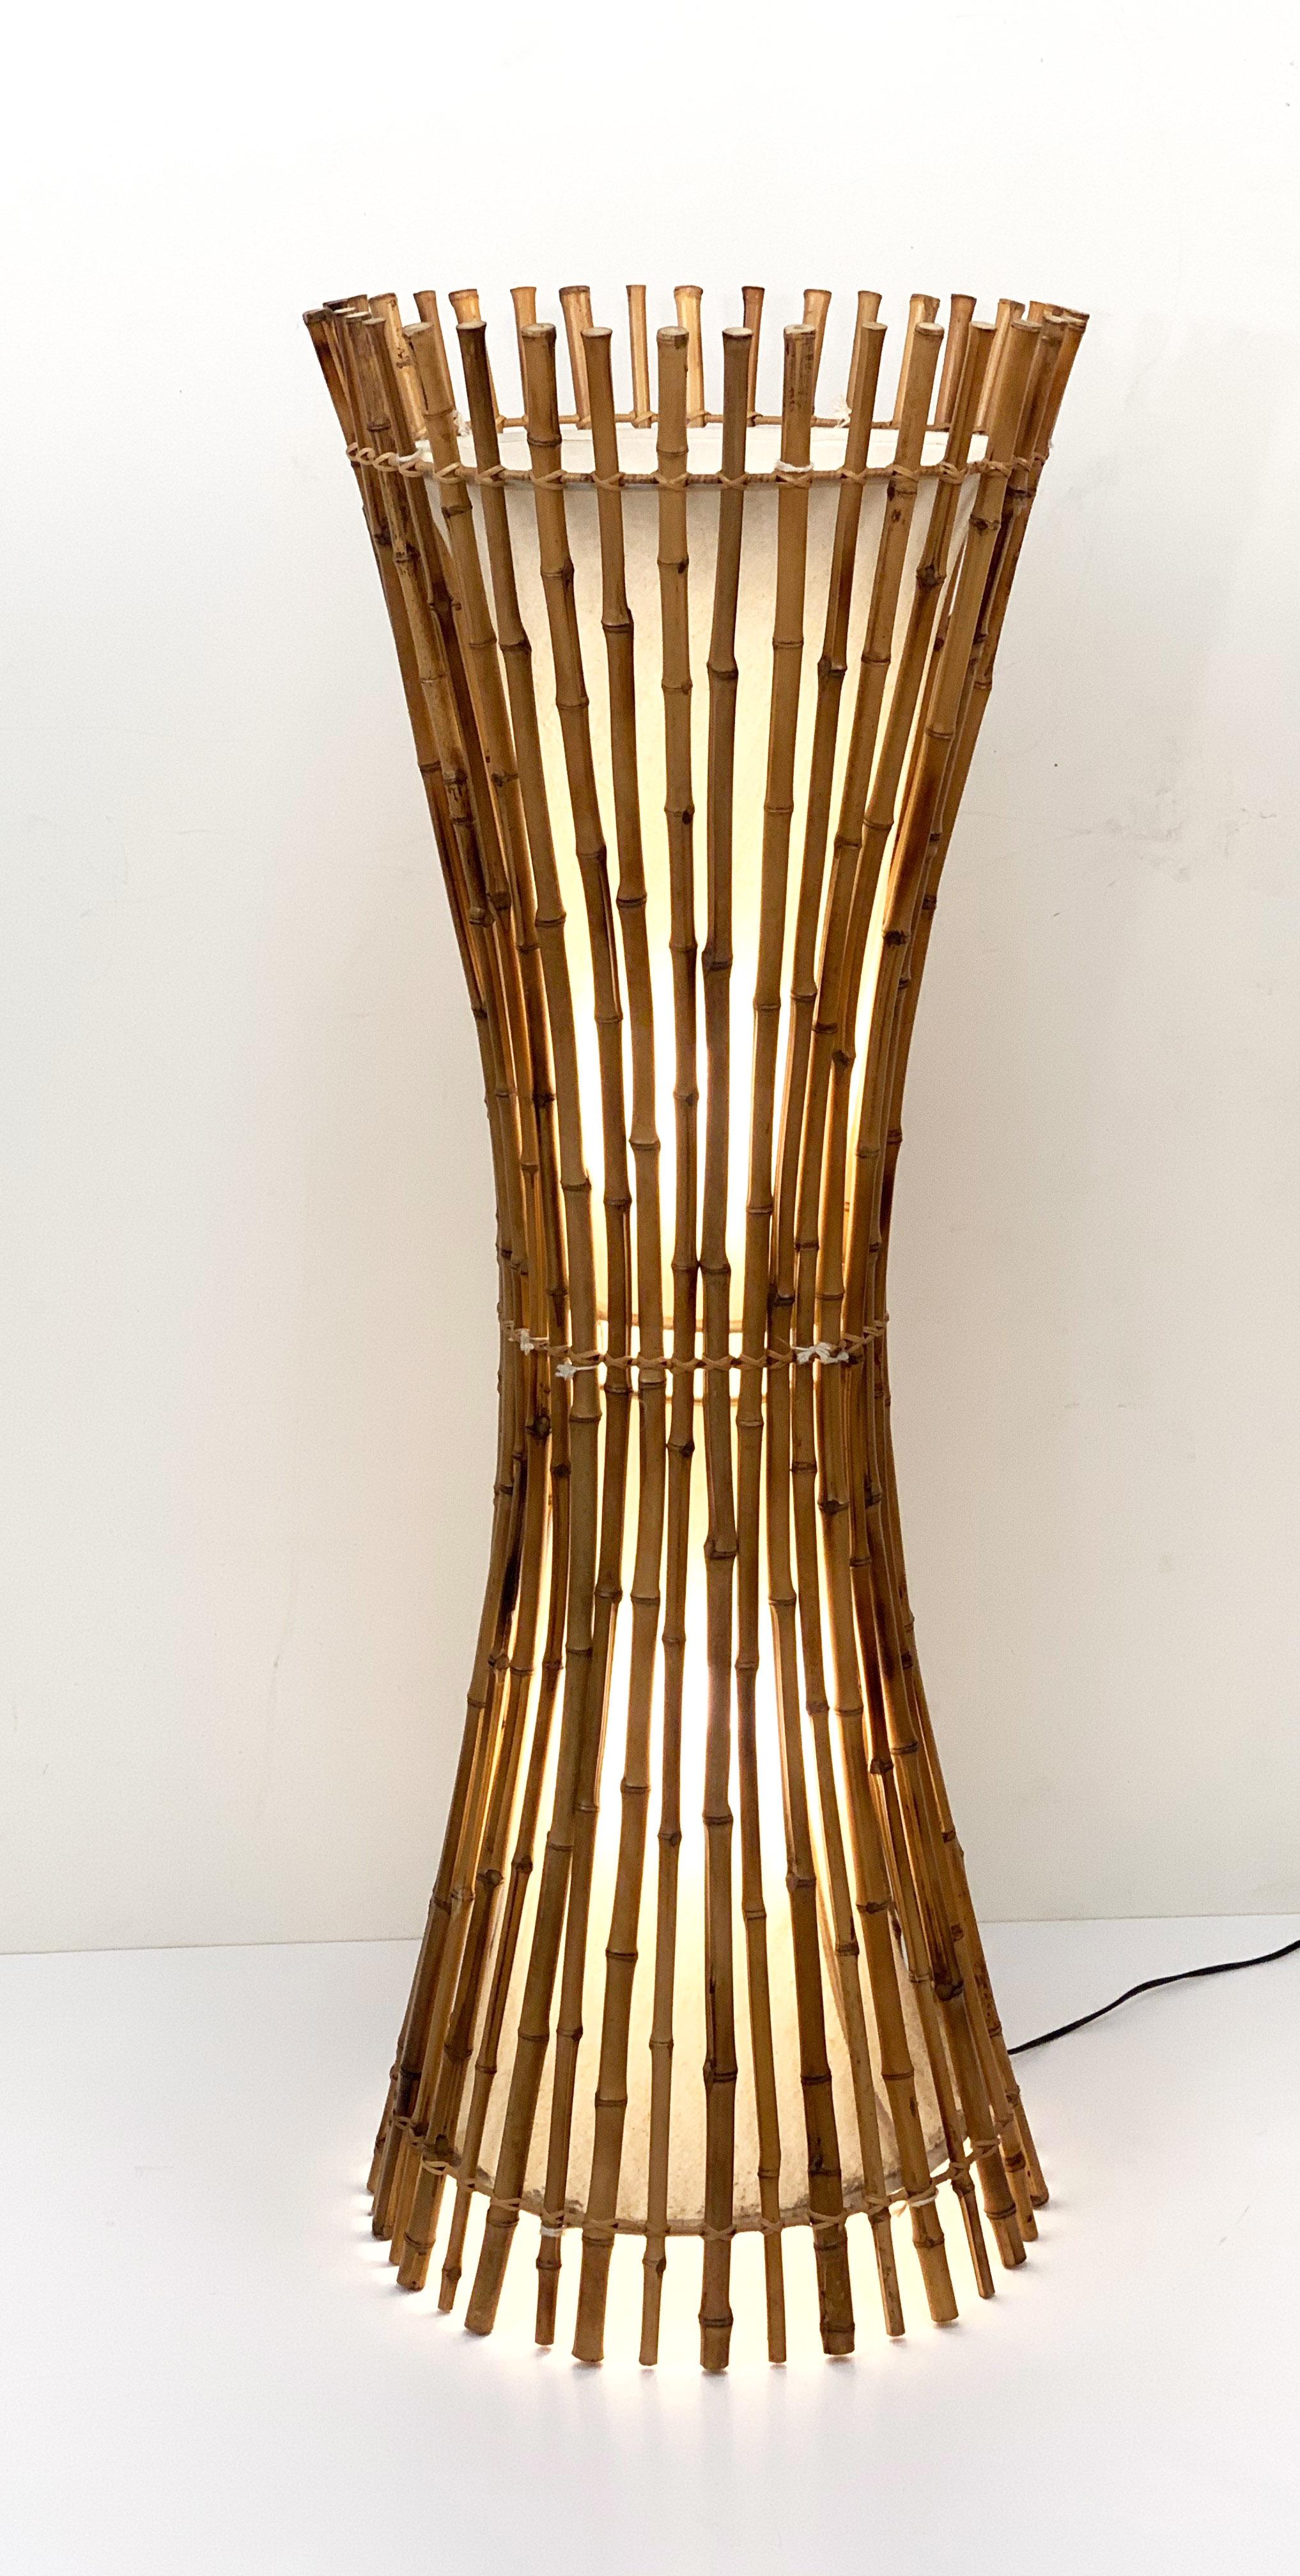 Wonderful midcentury floor lamp in the style of Franco Albini.

It is made of bamboo and rattan and it has the shape of two cones narrowing in the centre.

It is a marvellous piece produced in Italy during 1960s.

This item is perfect for a